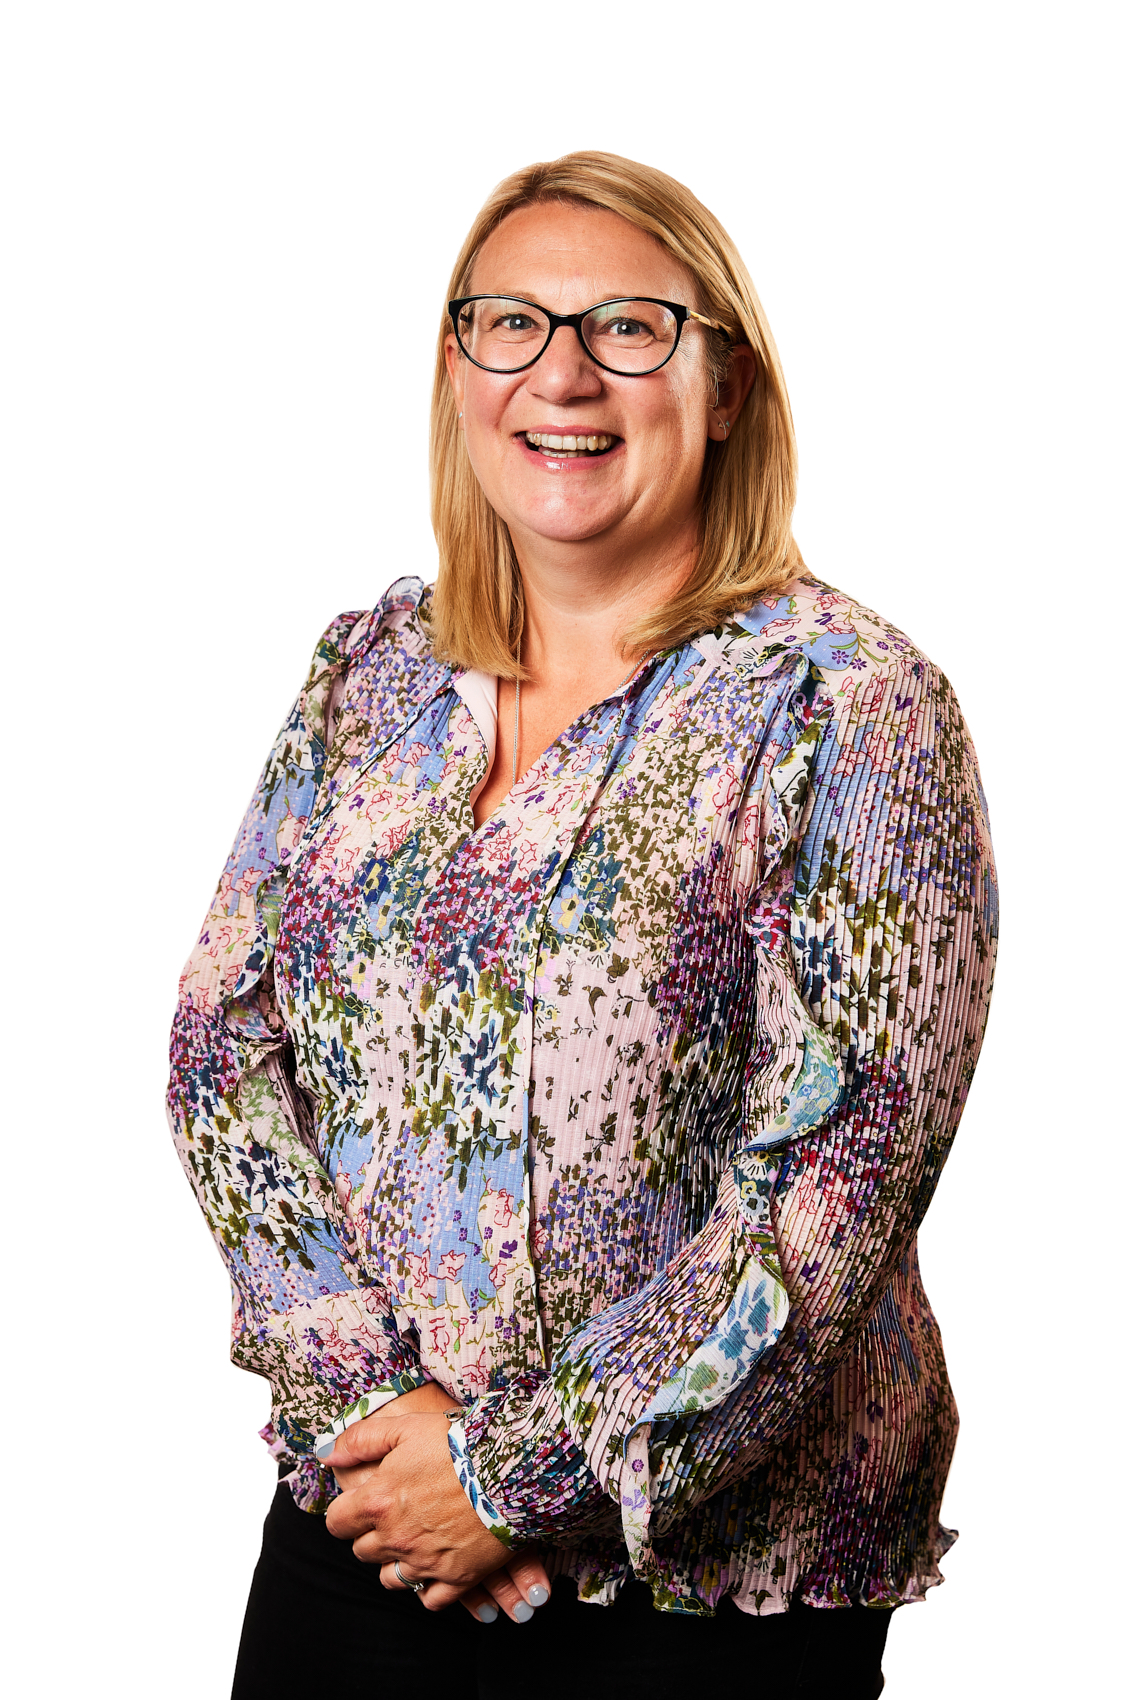 Marie Walsh - Employment Solicitor & Mediator in Leeds